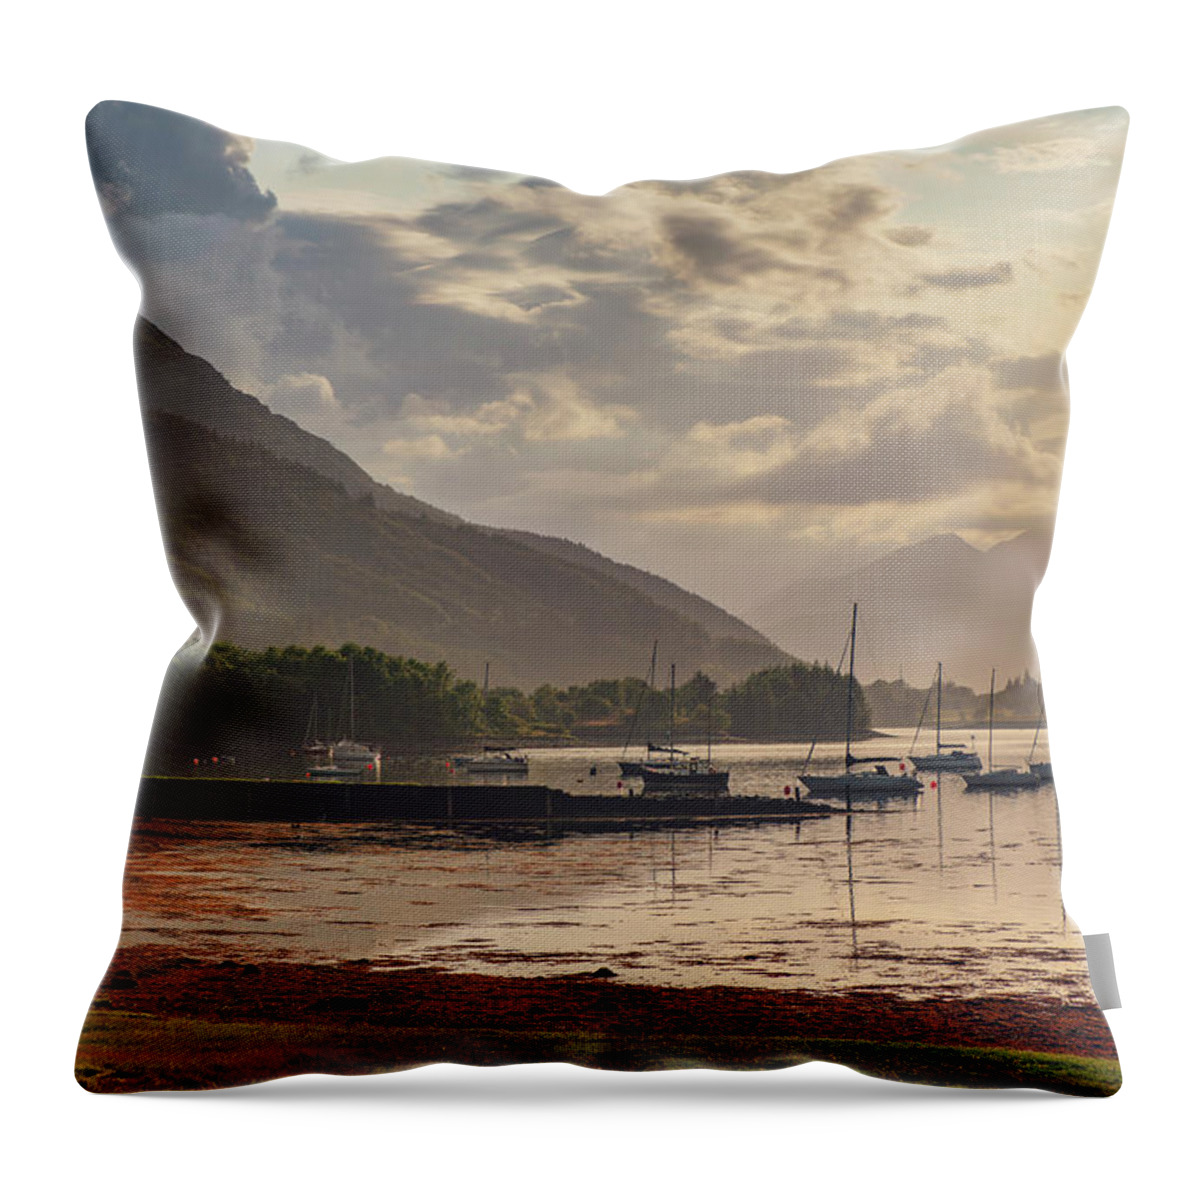 Ballaculish Throw Pillow featuring the photograph Ballaculish Sunset by Ray Devlin